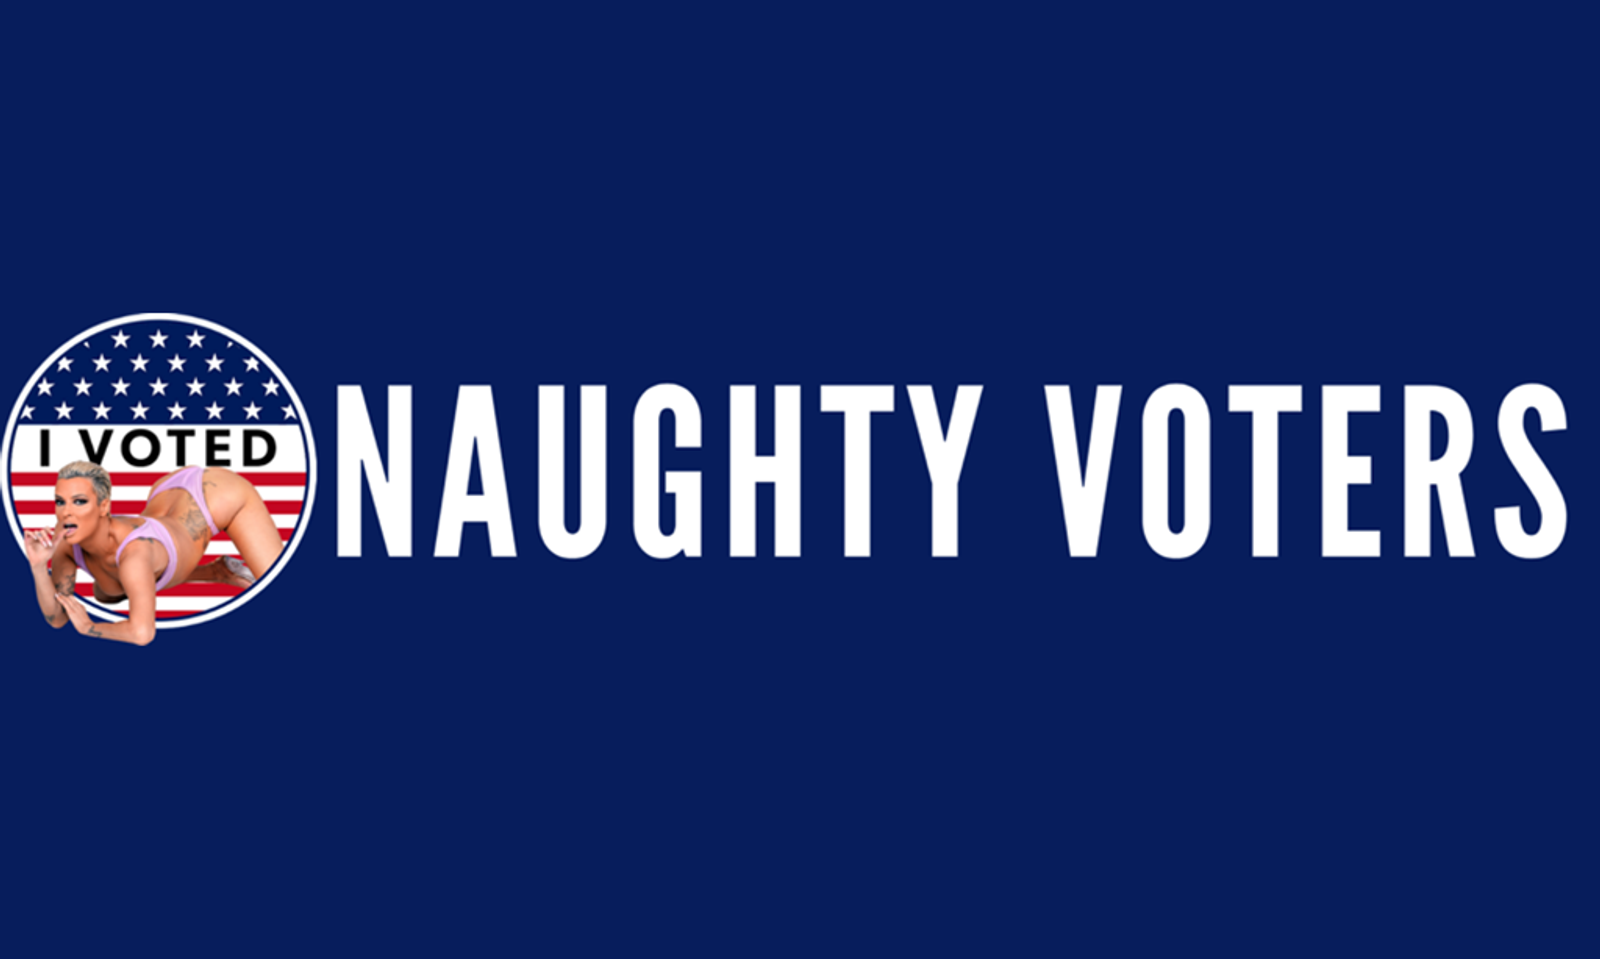 CAM4 Promotes Voter Participation With NaughtyVoters.com